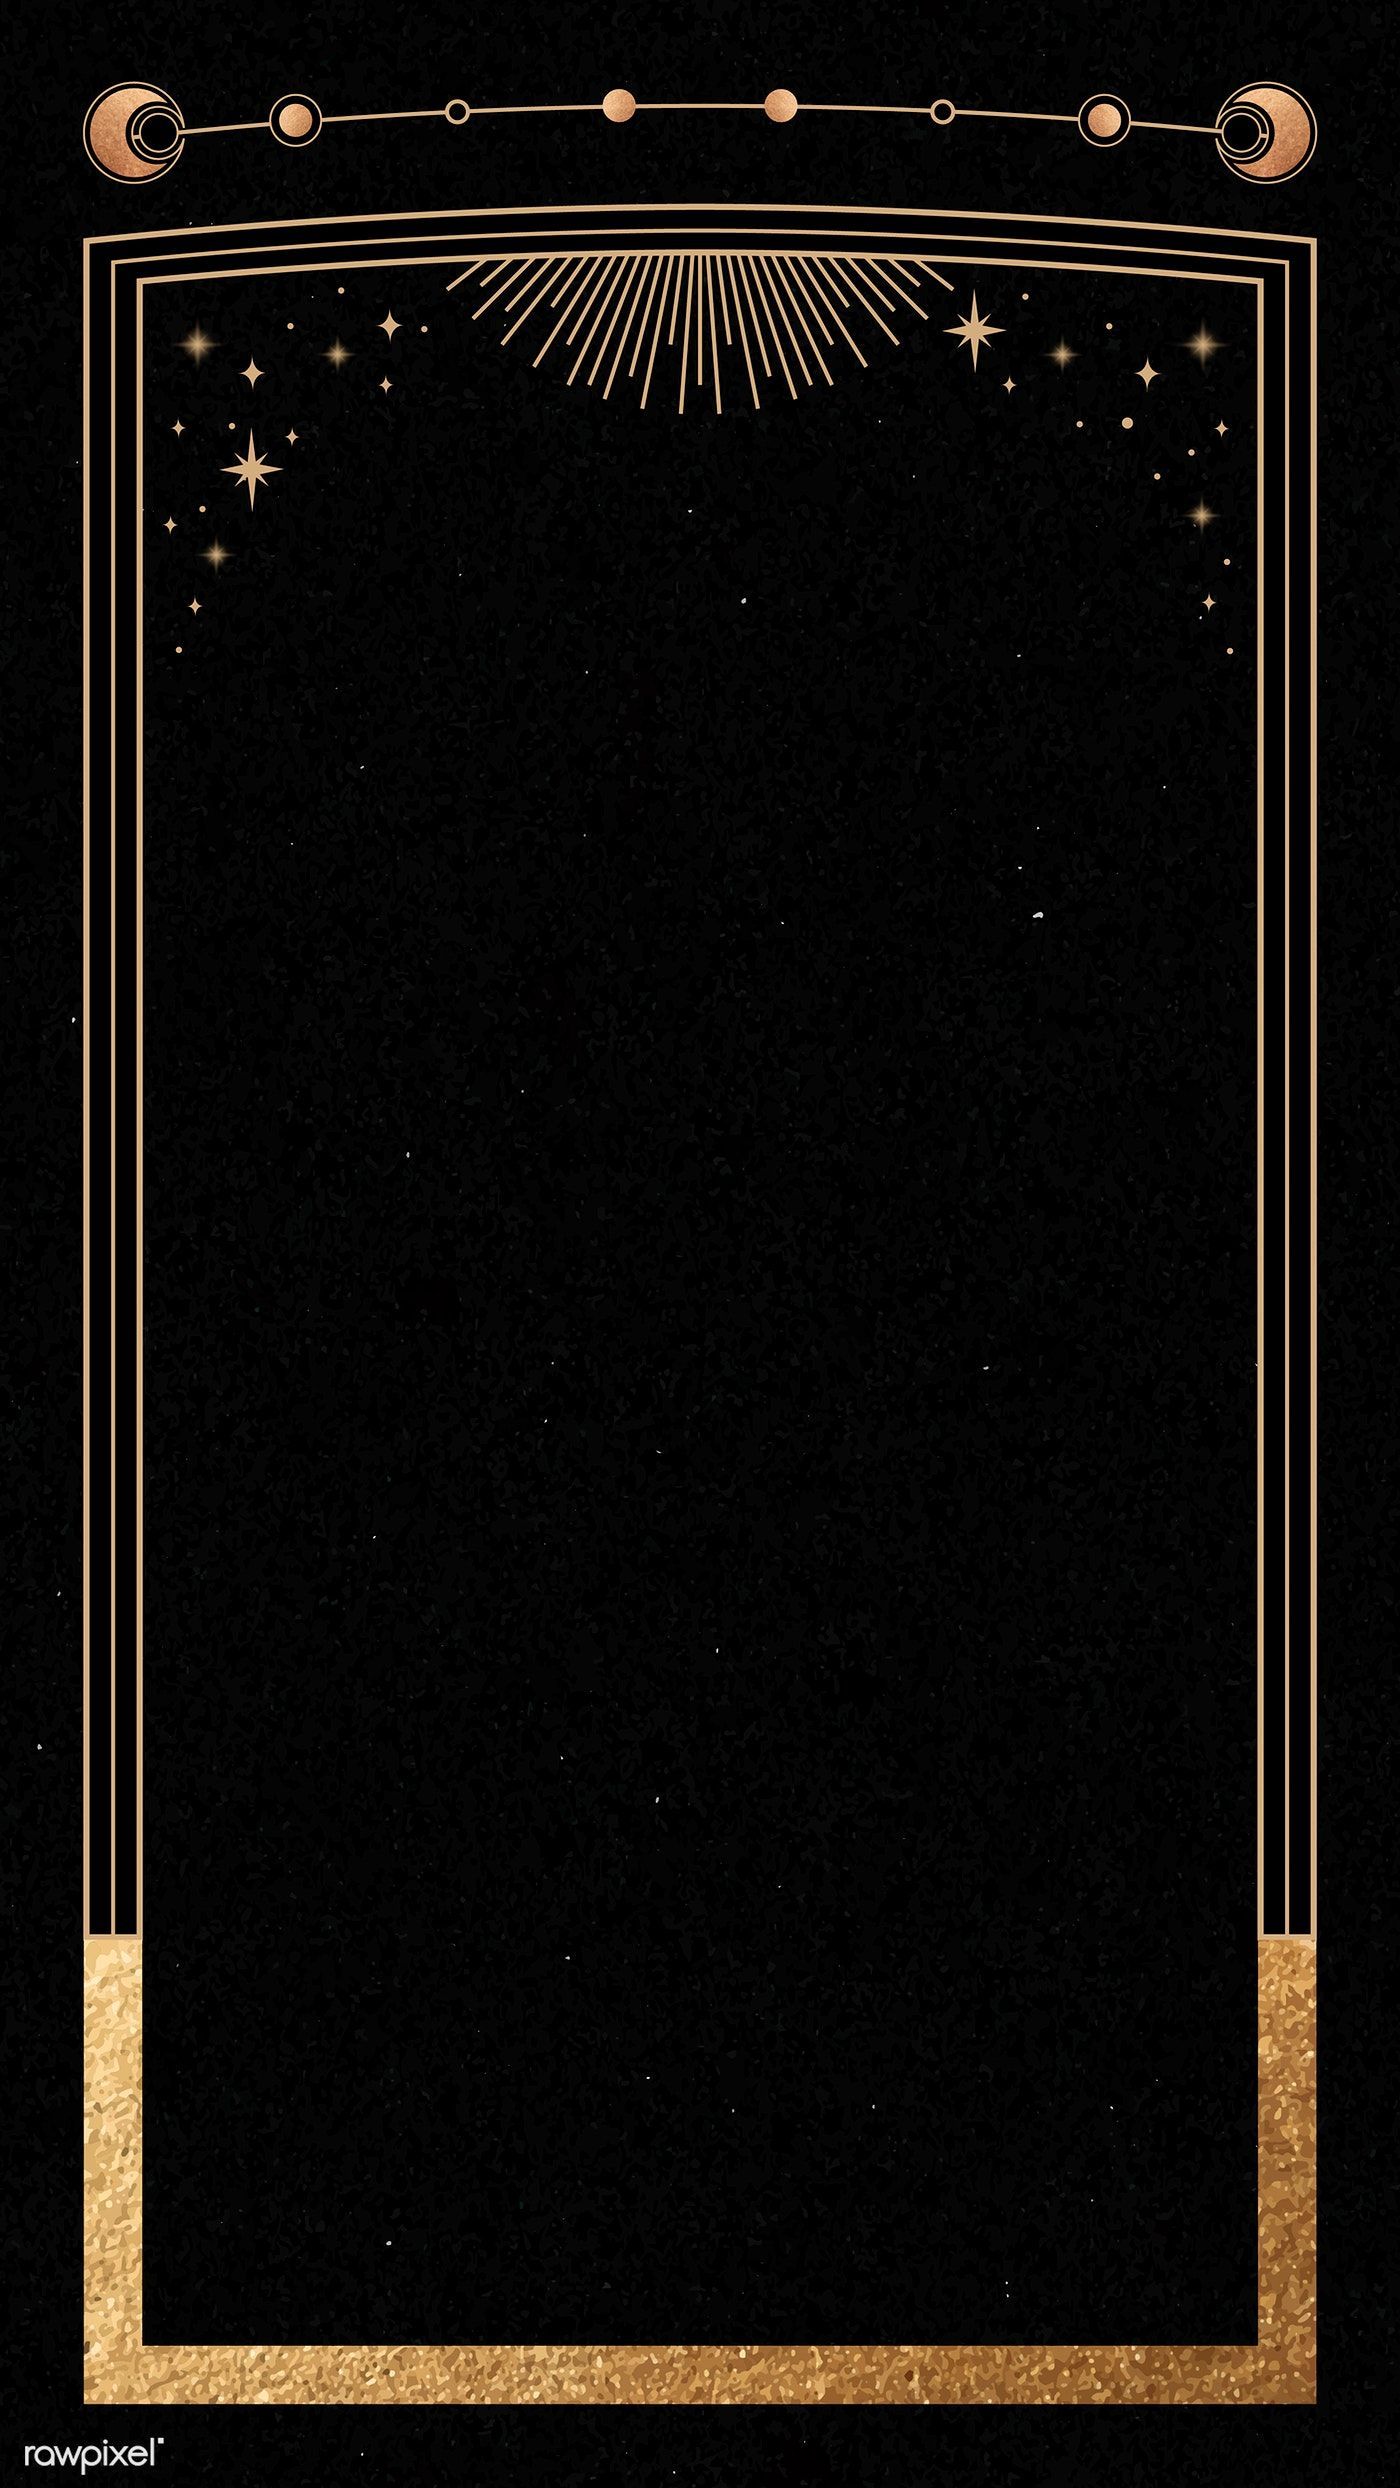 Download premium vector of Mystical gold frame on black background mobile - Download premium vector of Mystical gold frame on black background mobile -   14 beauty Black background ideas